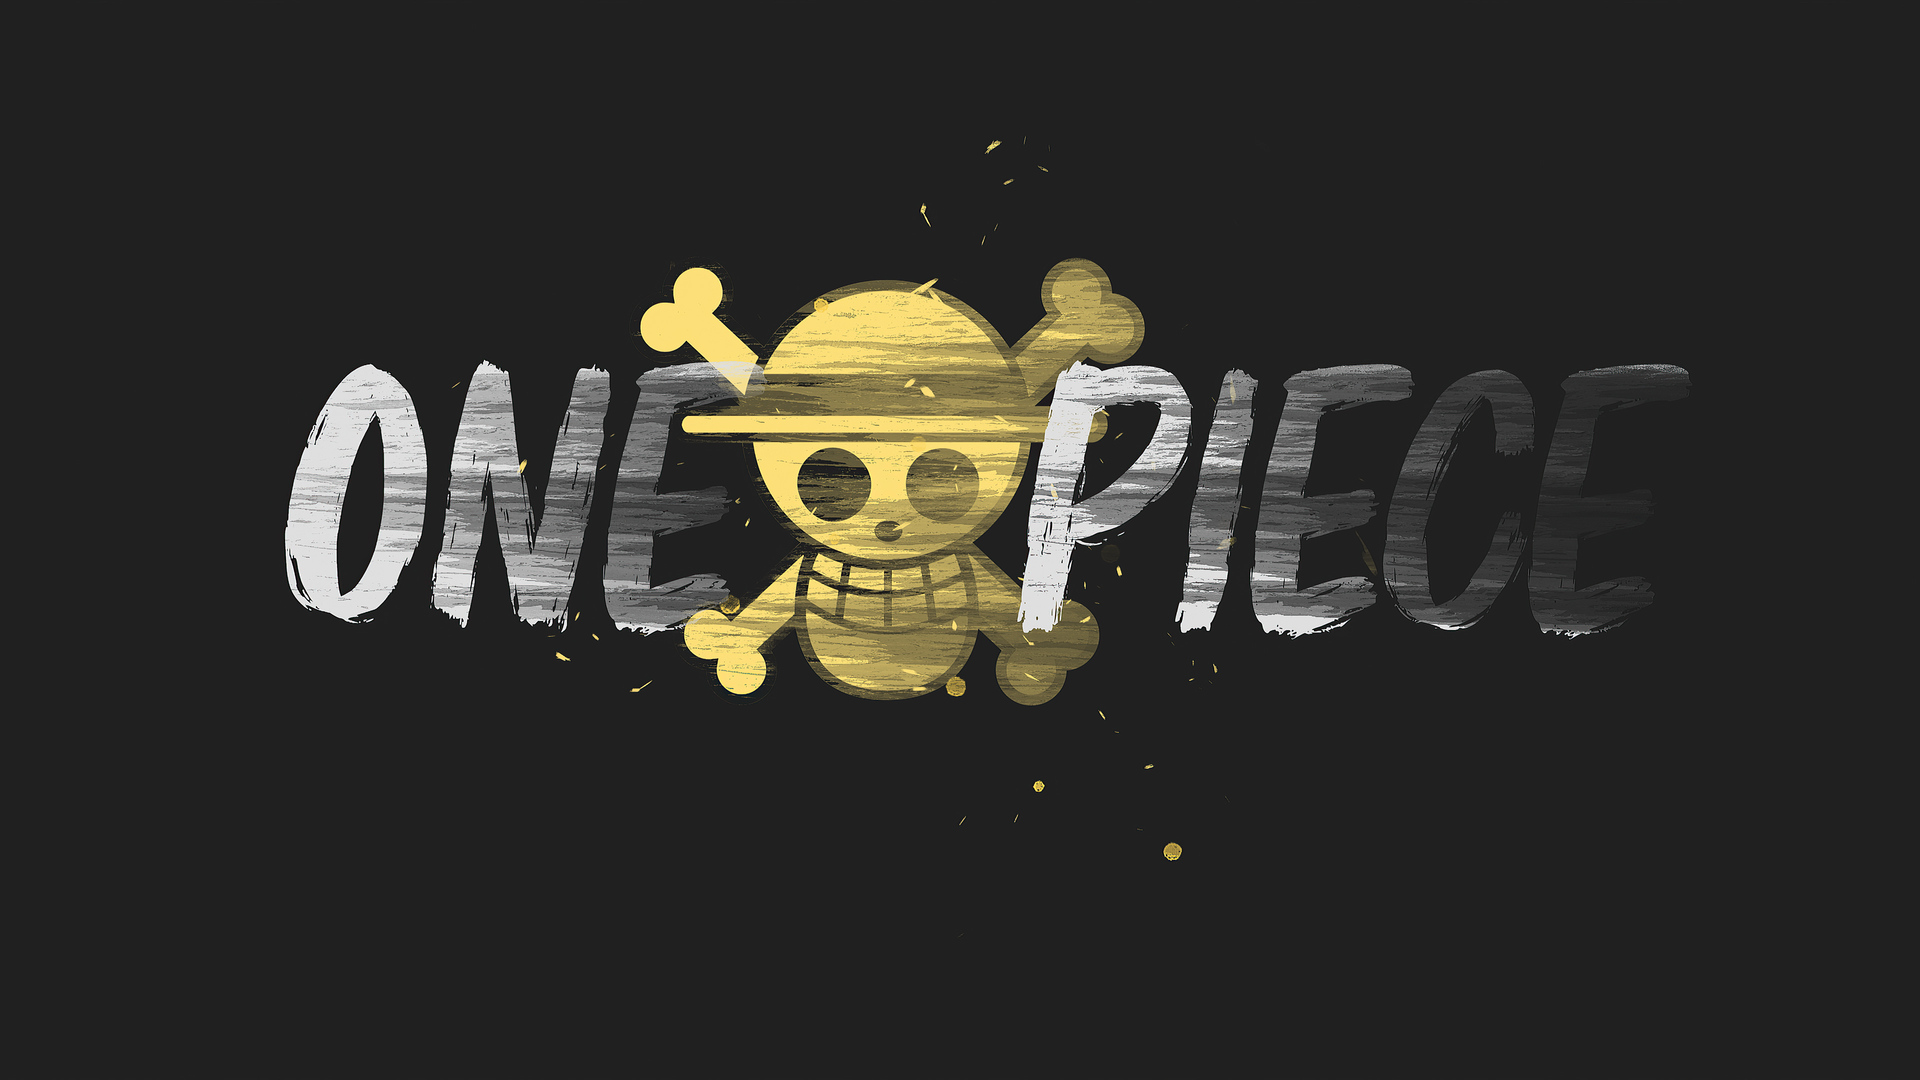 3840x2160 / 3840x2160 one piece 4k hd wallpaper free download -  Coolwallpapers.me!